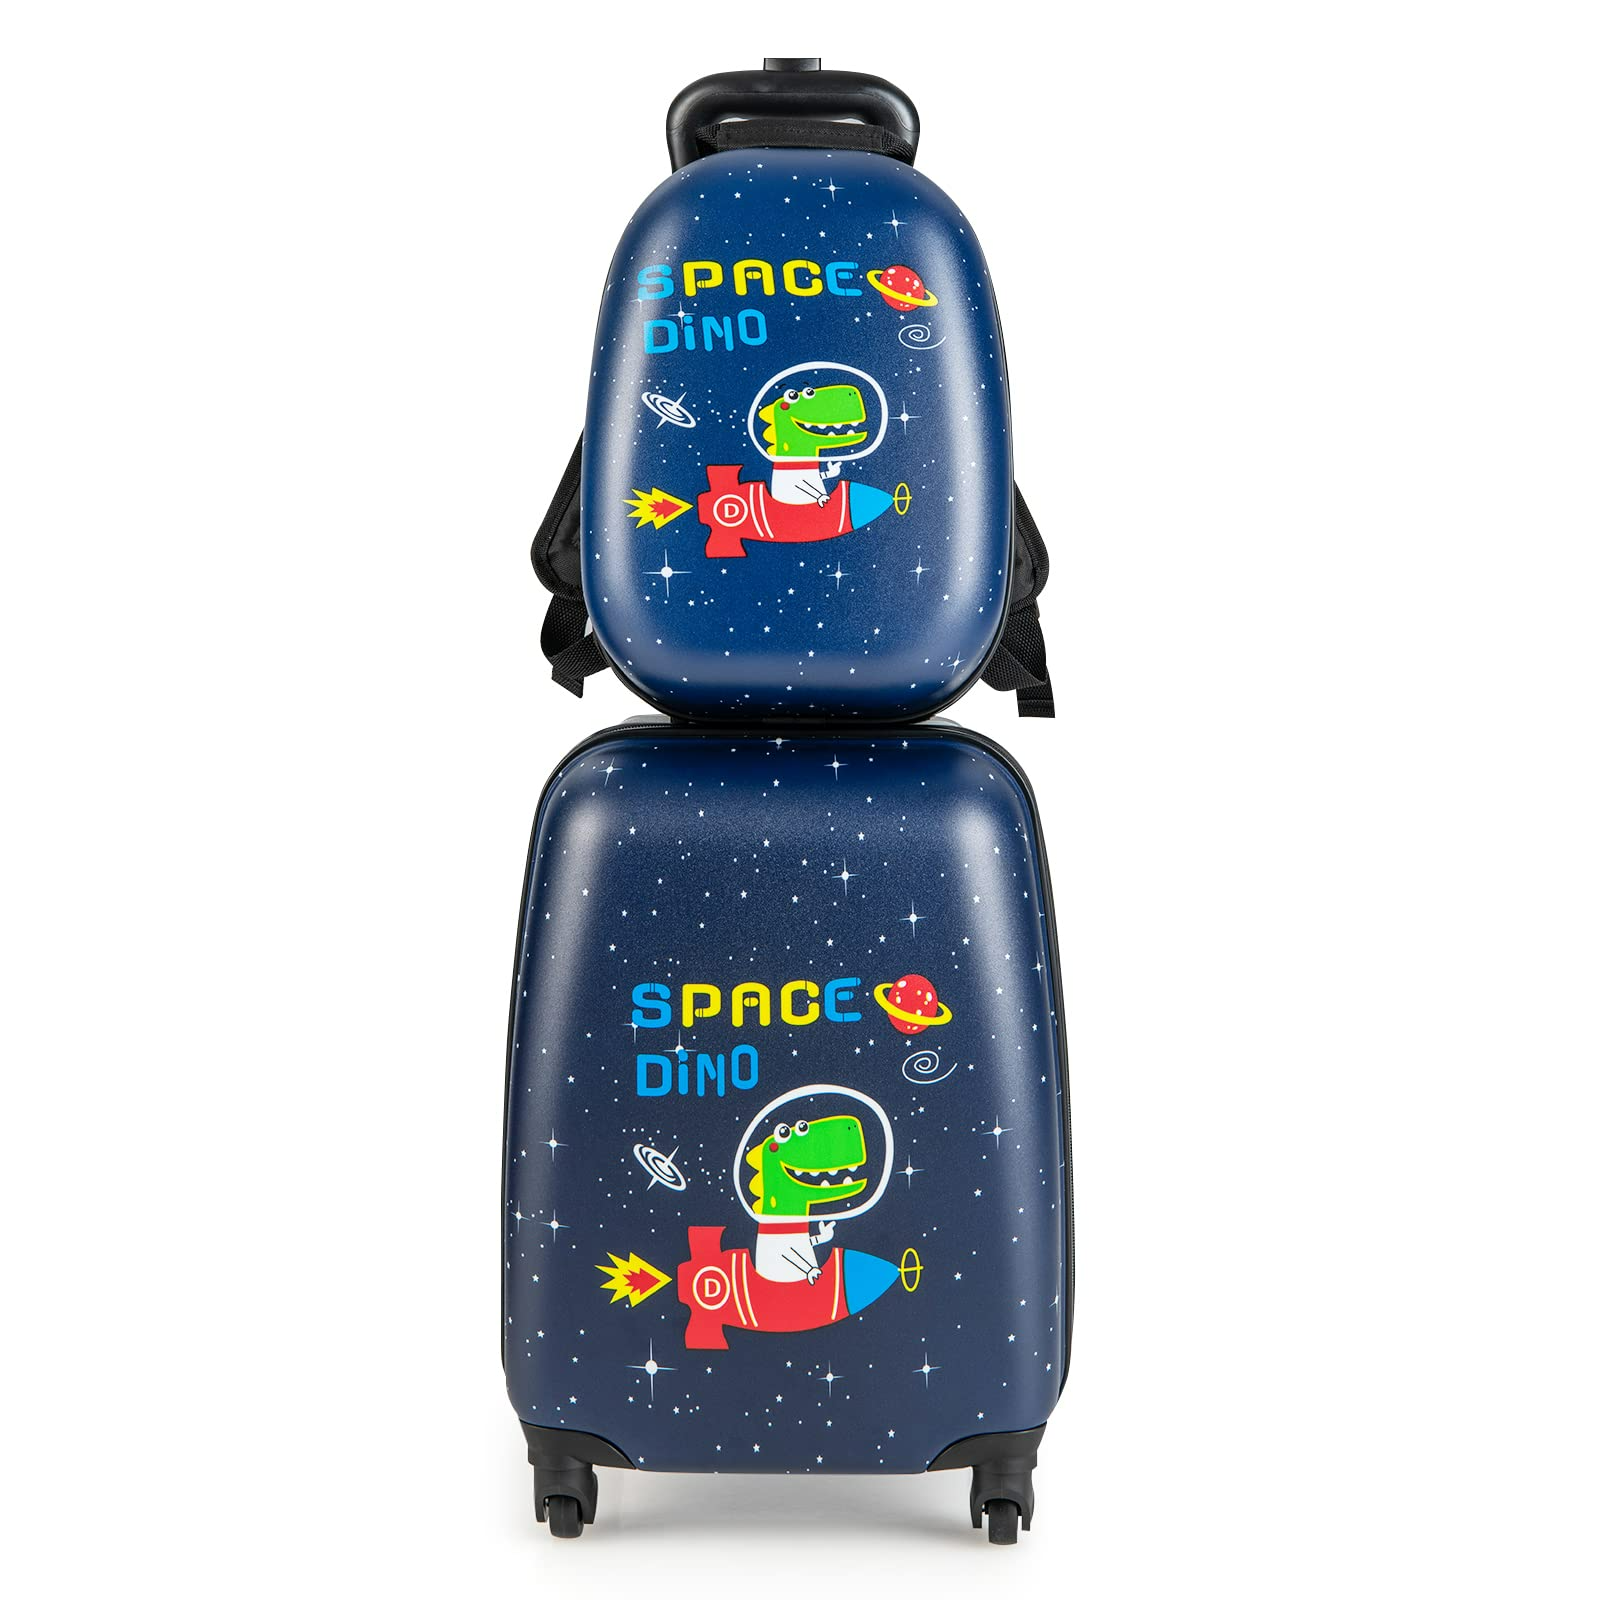 INFANS Kid Luggage Set, 12’’ Travel Backpack and 16’’ Carry on Suitcase with Rolling Spinner Wheels for Children Boys Girls, Space Dinosaur